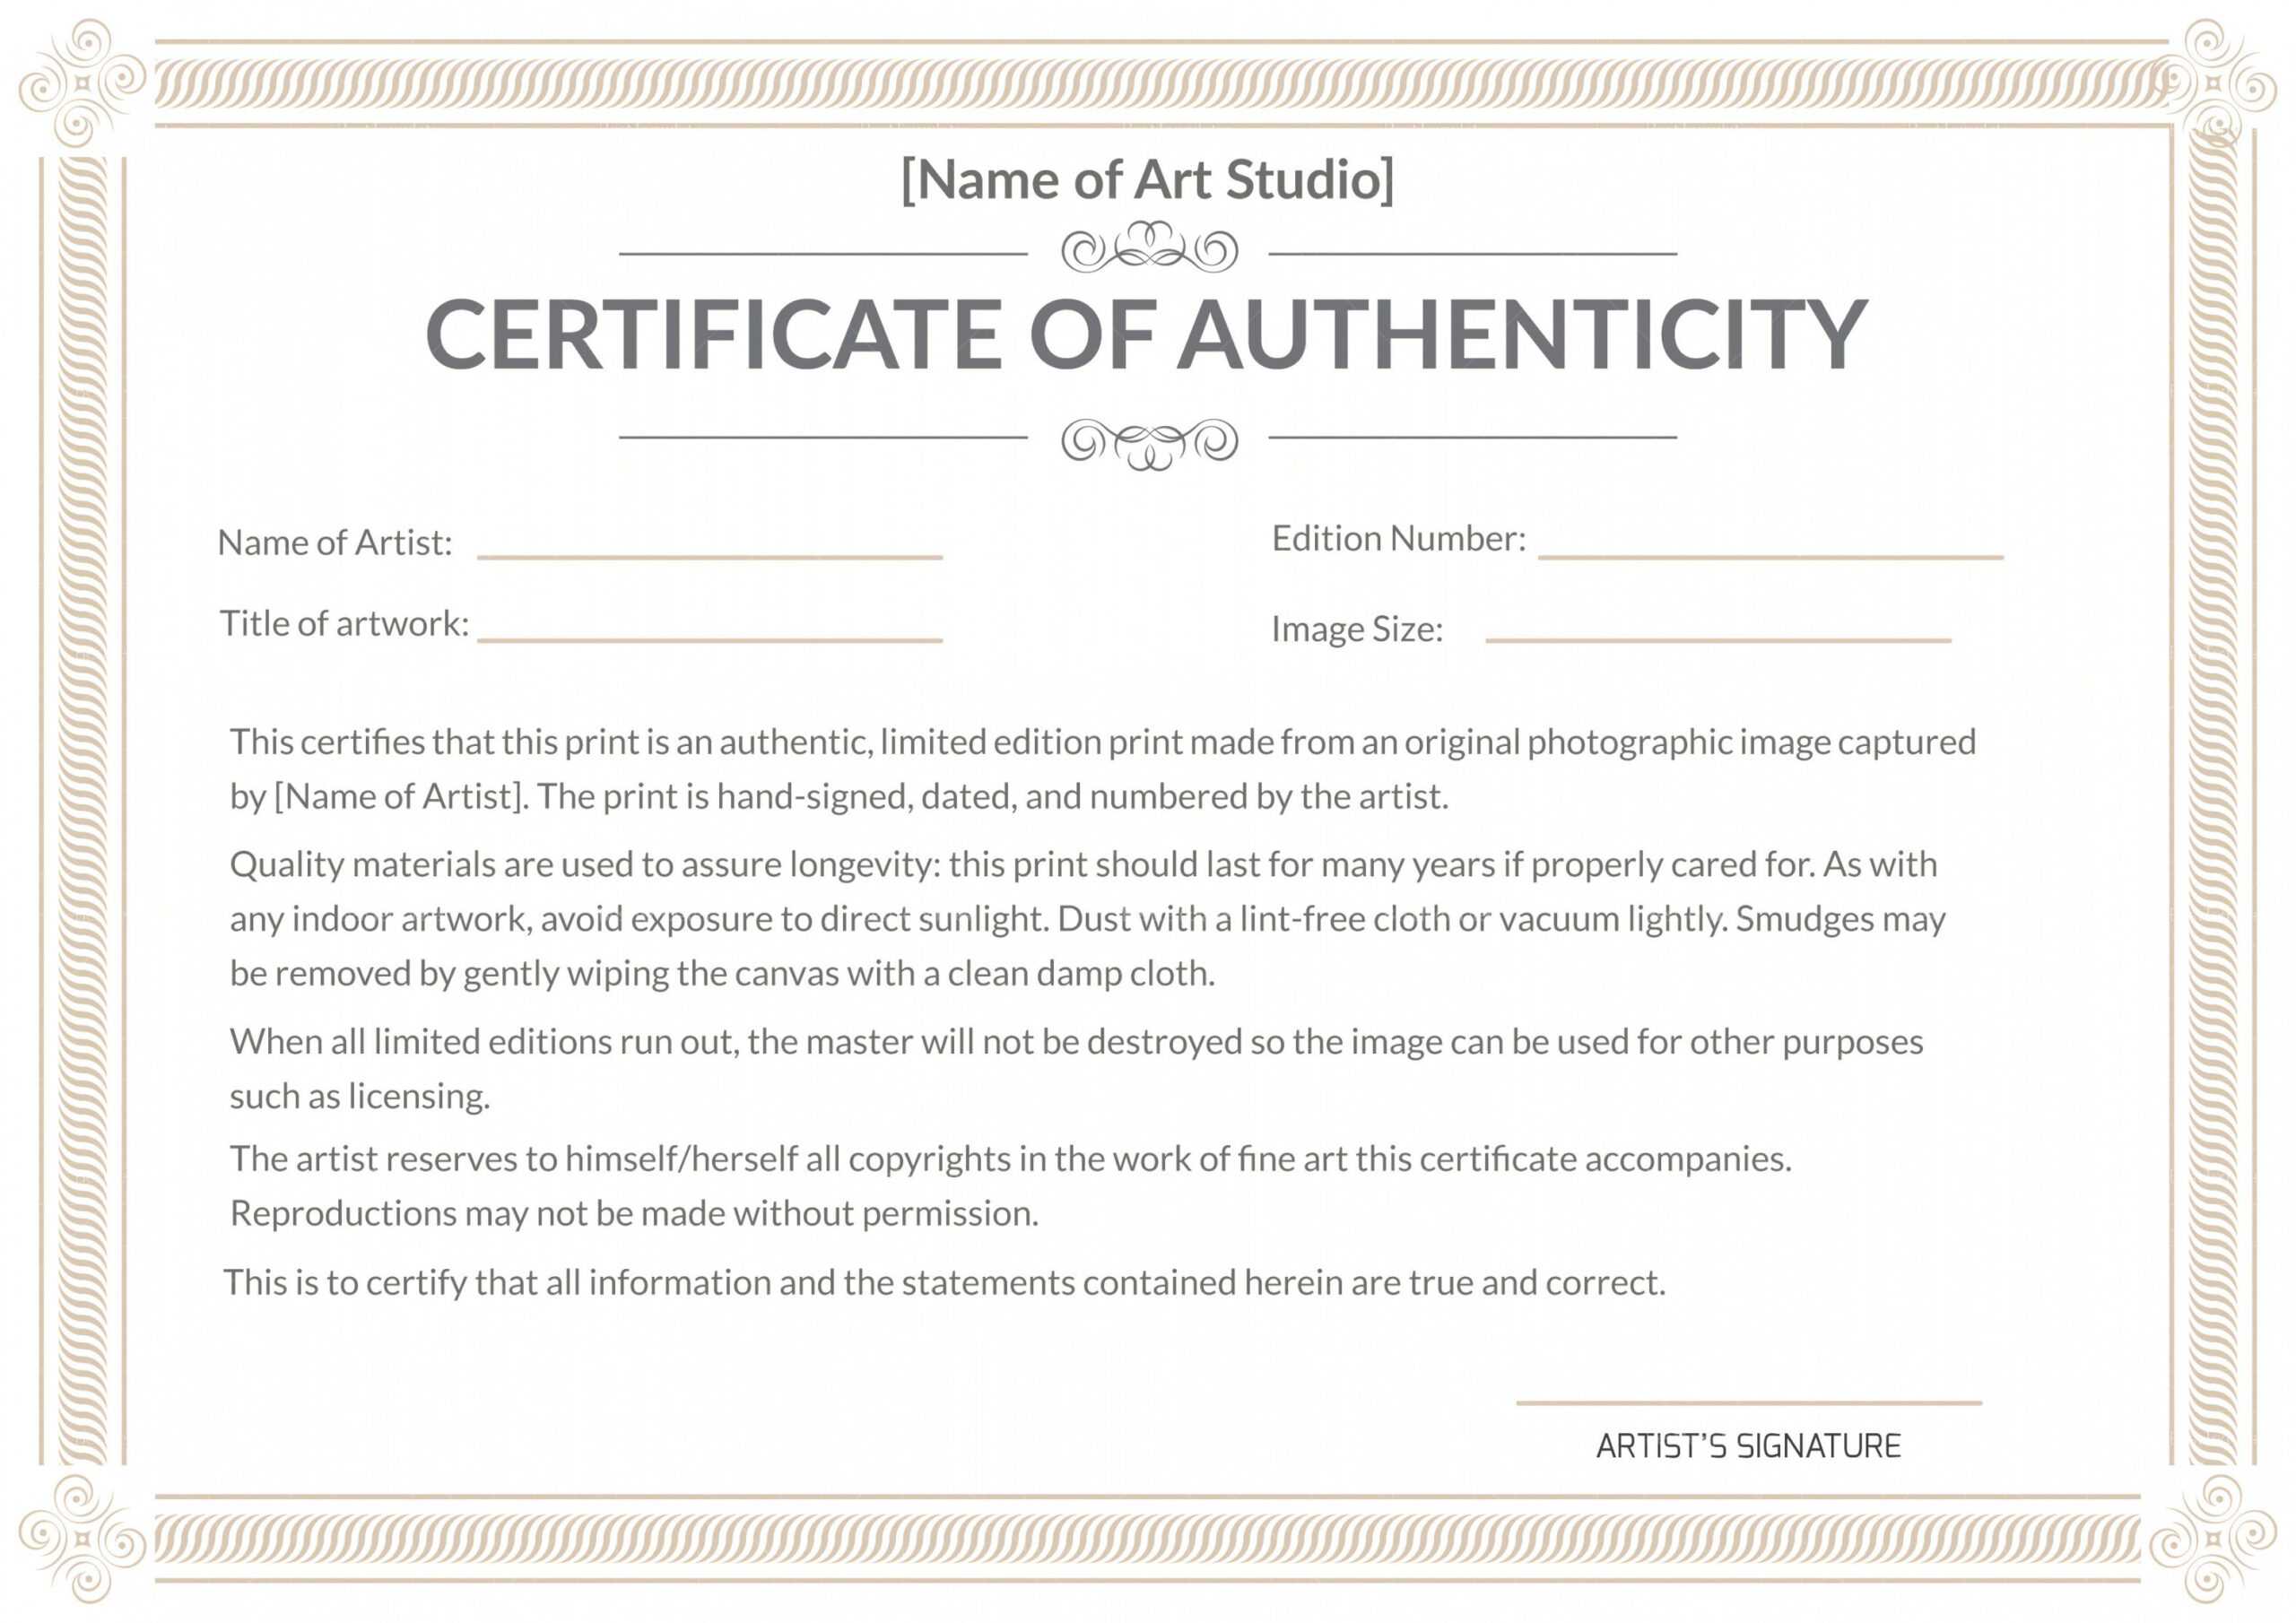 Printable Art Certificate Of Authenticity Template 12 Within Certificate Of Authenticity Template